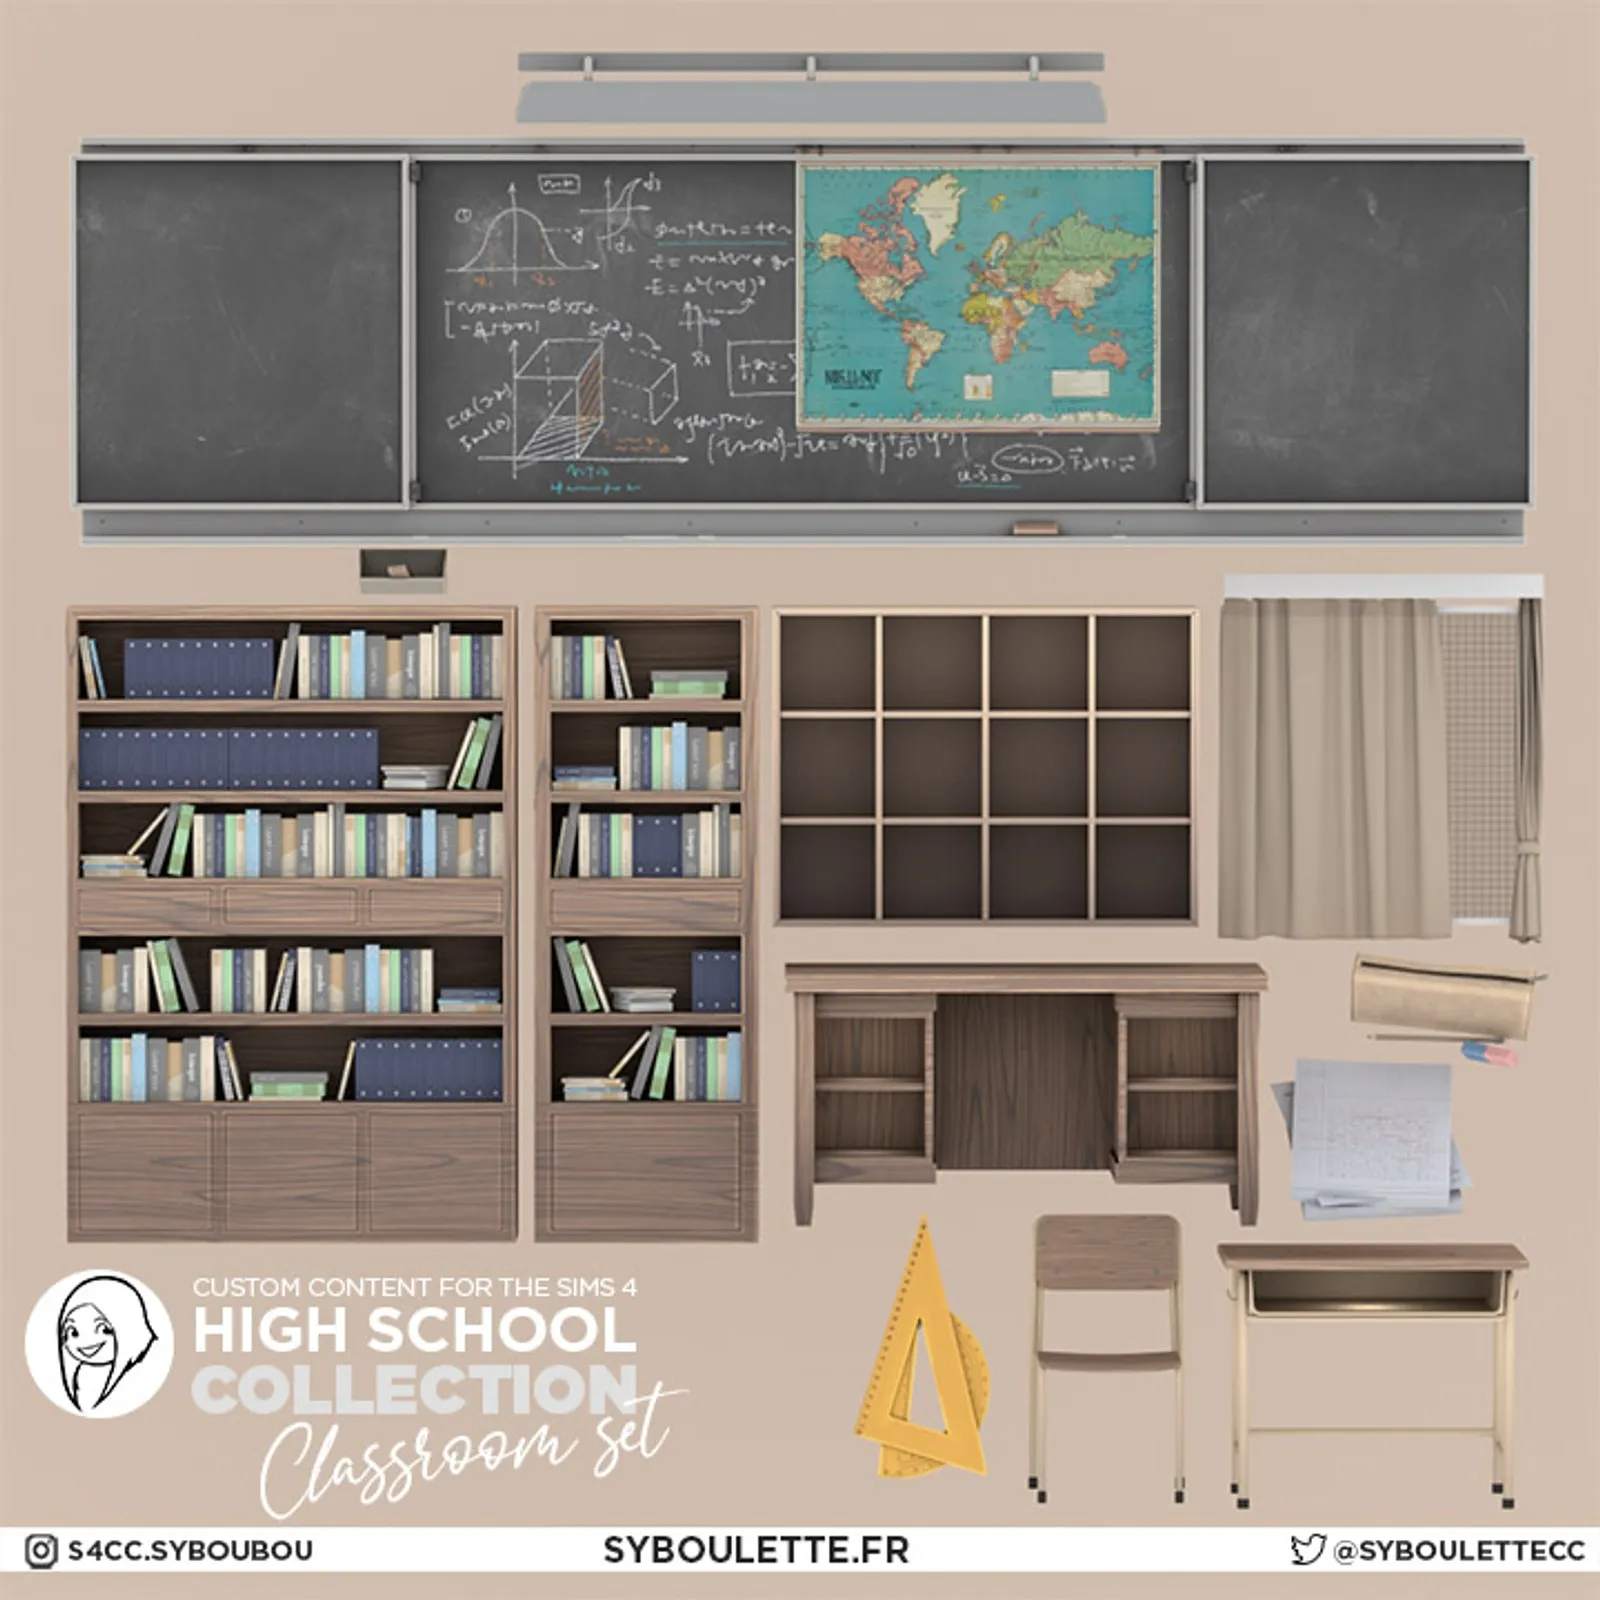 [DOWNLOAD] Highschool collection: Classroom set (part 2)